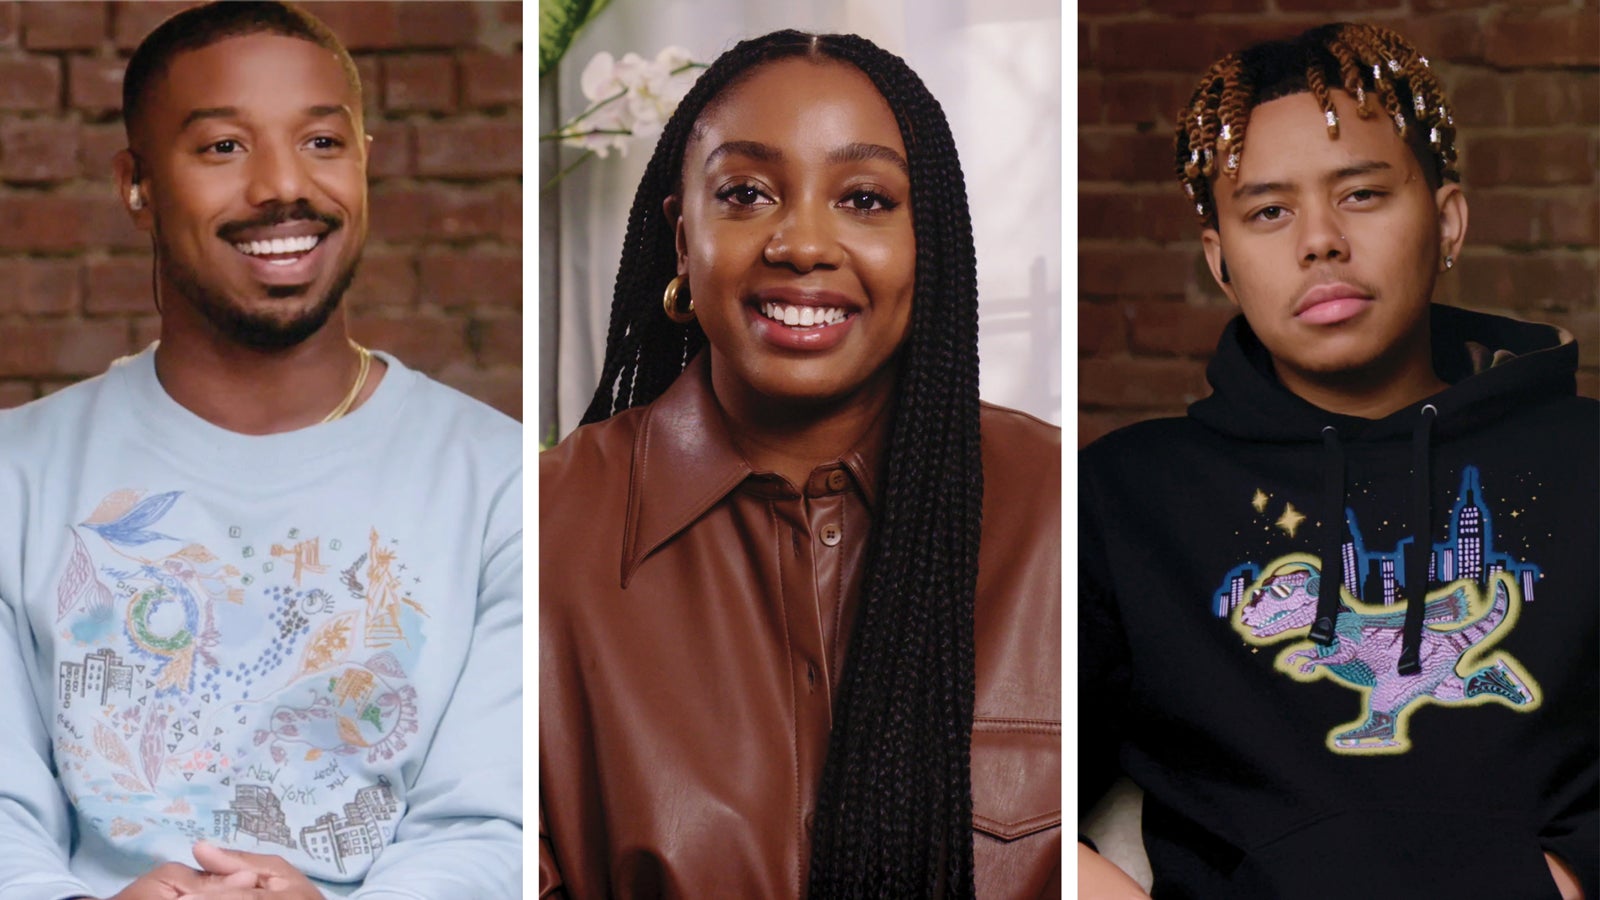 Coach Releases Youtube Conversation Starring Michael B. Jordan, Cordae, And Lindsay Peoples Wagner